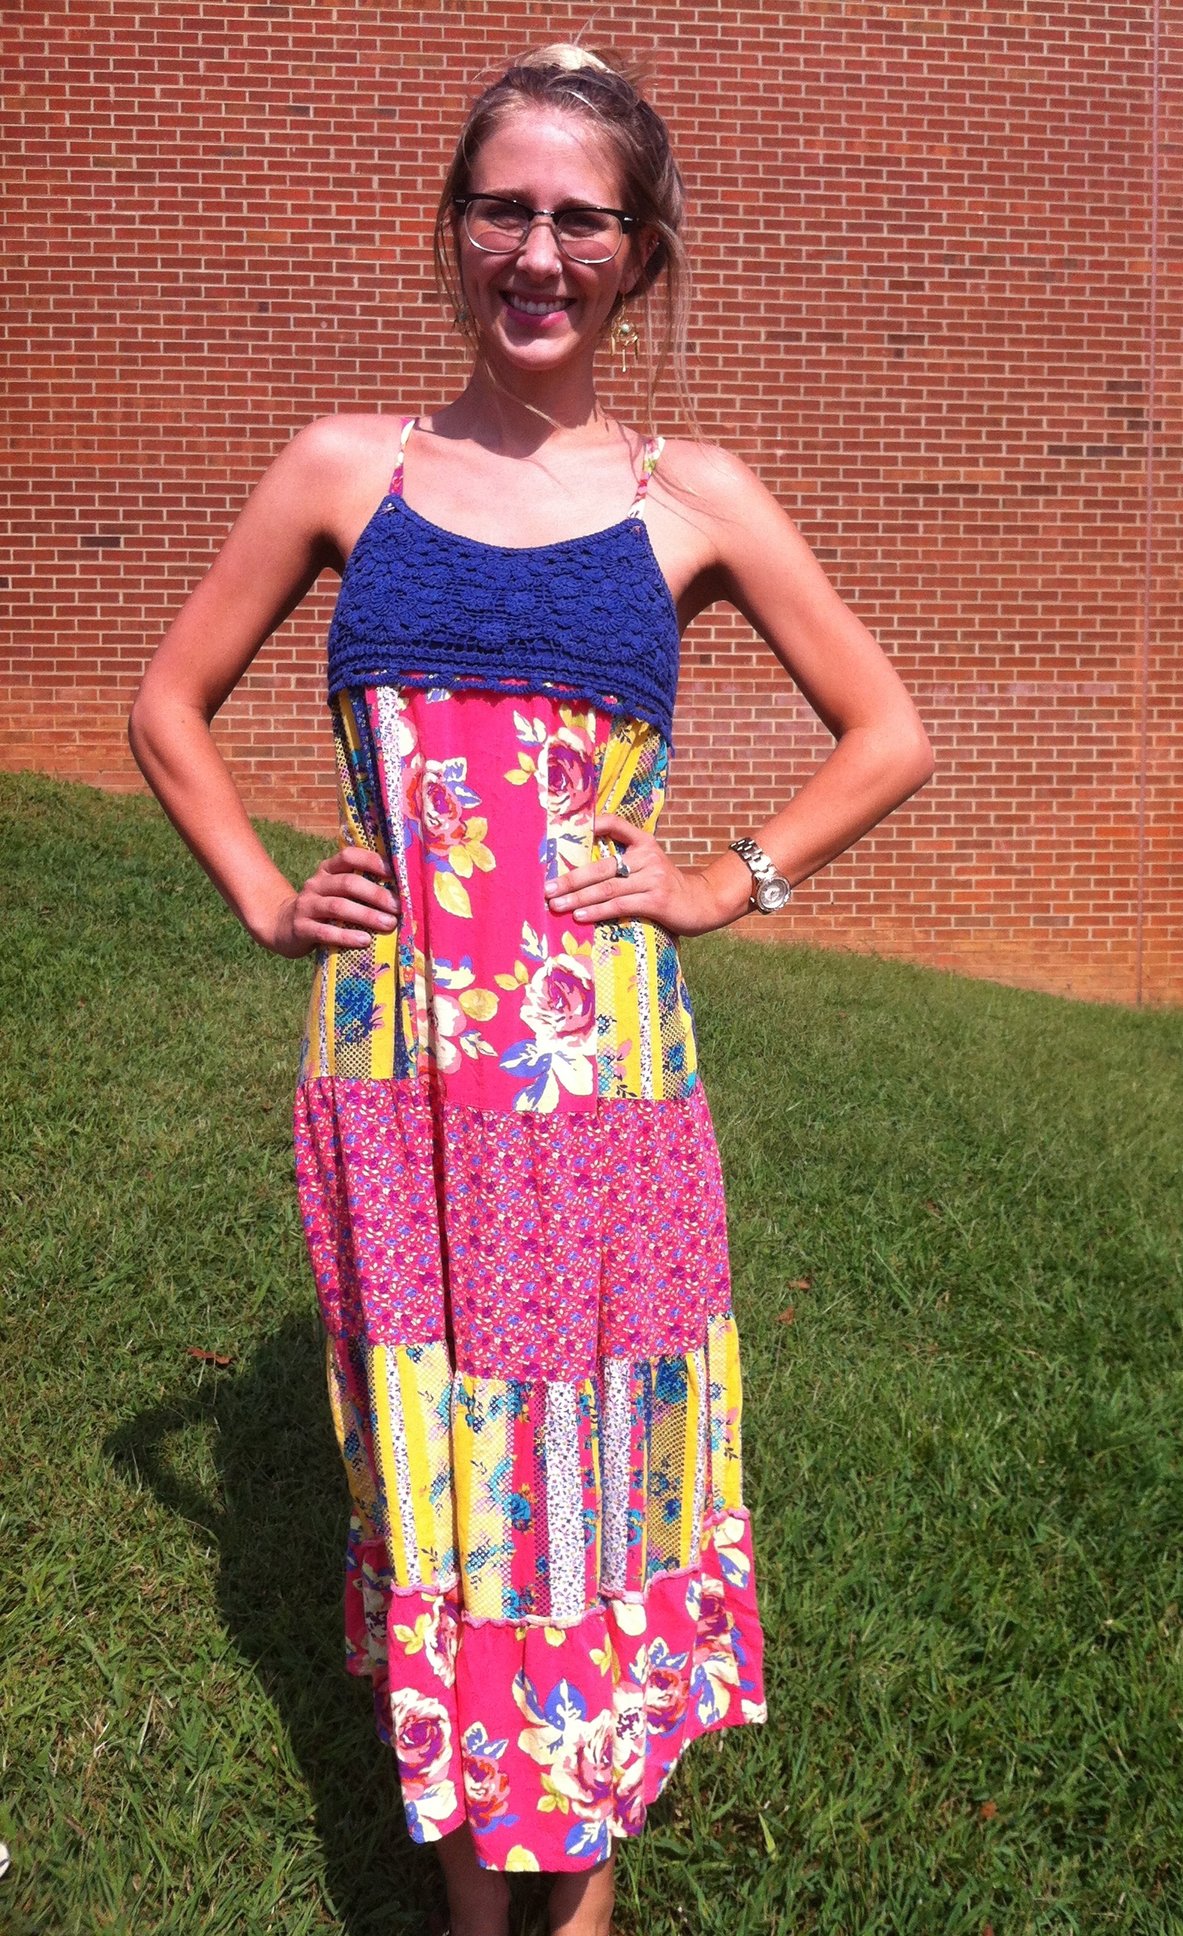 Campus Style: Erin Vines stays cool in bright, breezy dress